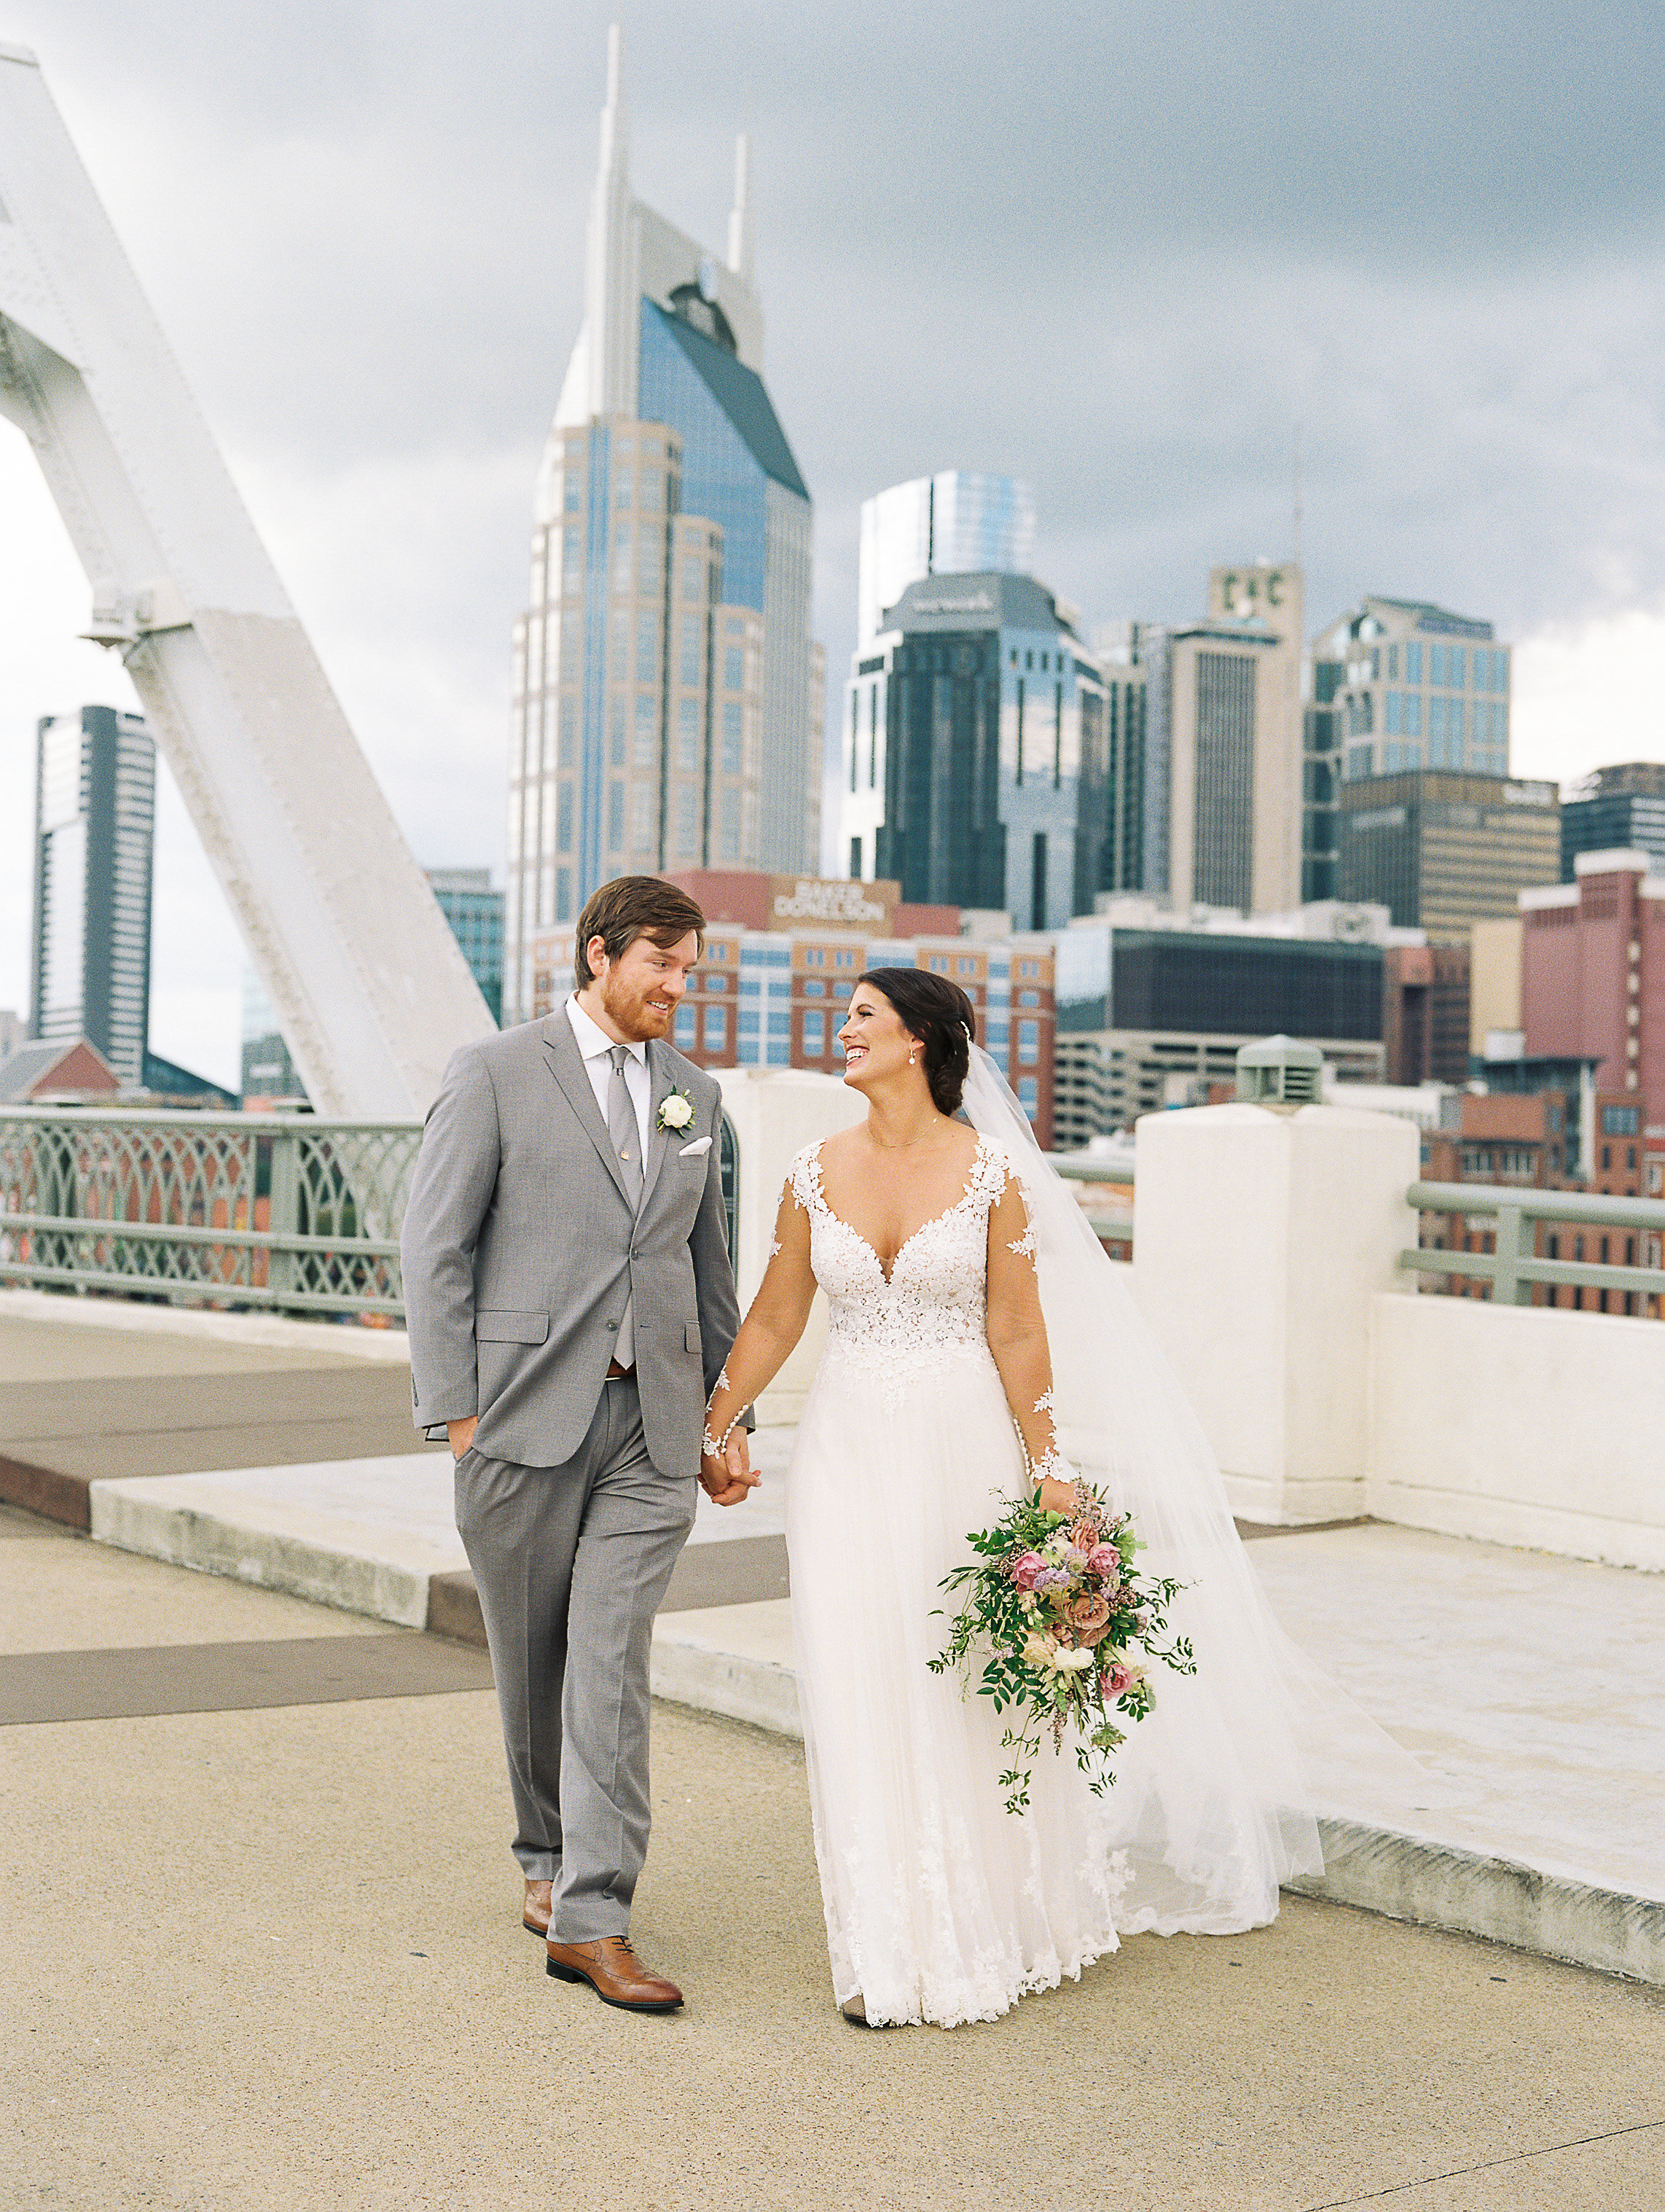 Lush greenery and lavender flowers // Newlywed portraits on the Shelby Bridge // Nashville Wedding Floral Design